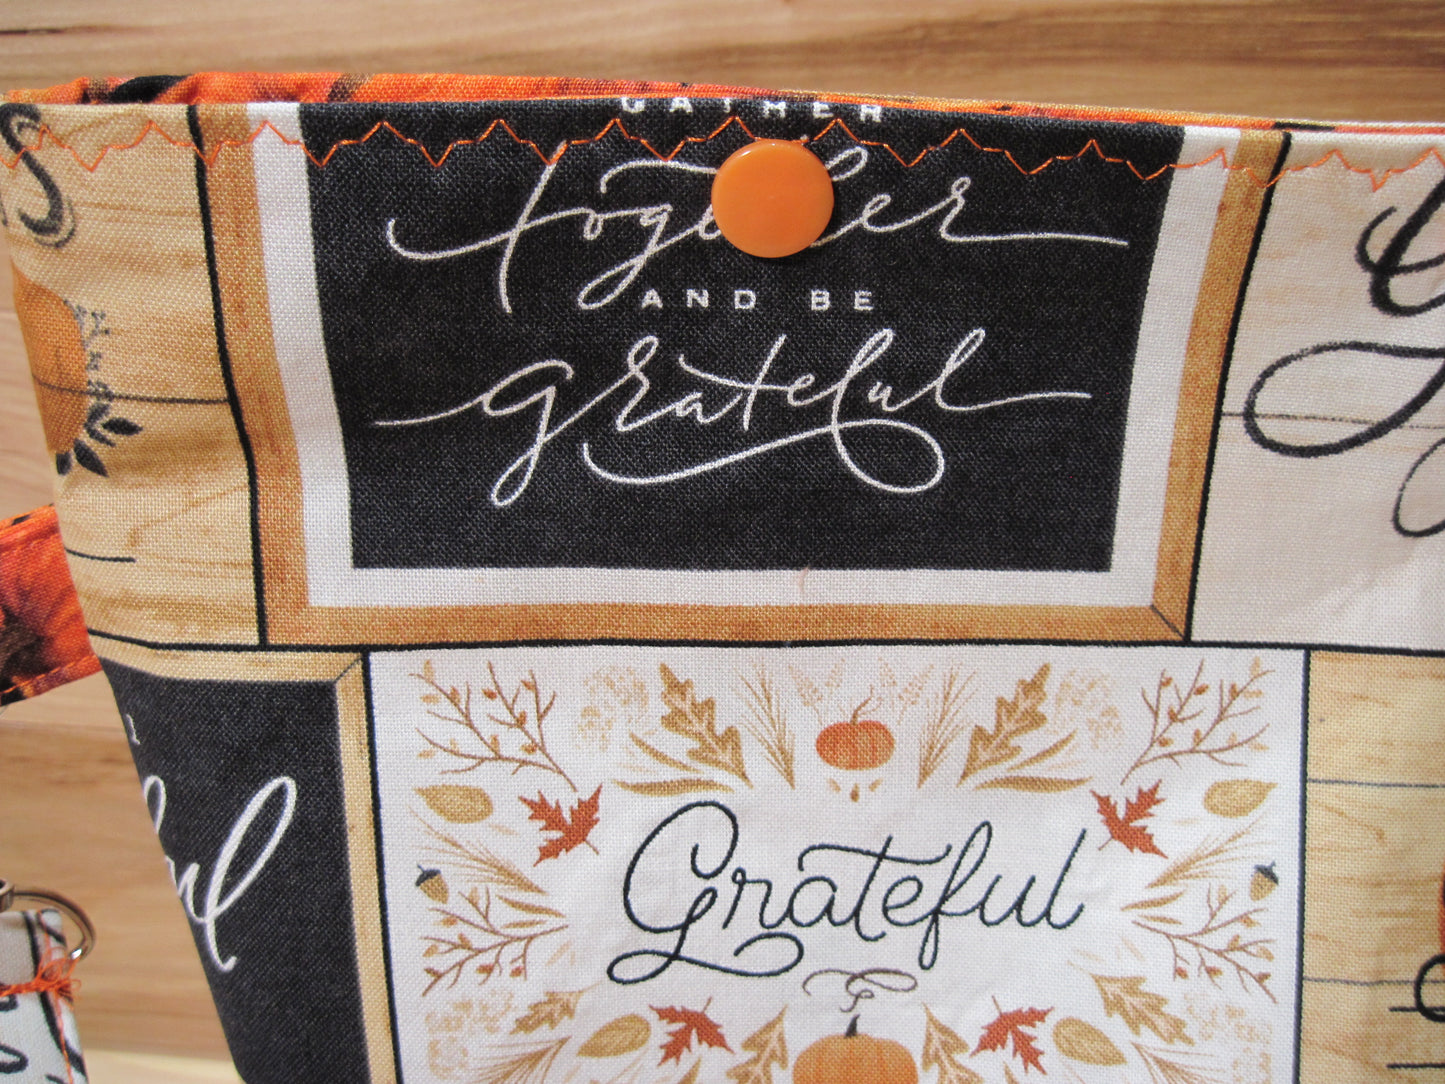 Medium Thankful Sayings "Grateful" Blessed" Give Thanks" w/ pumpkins & snaps project bag